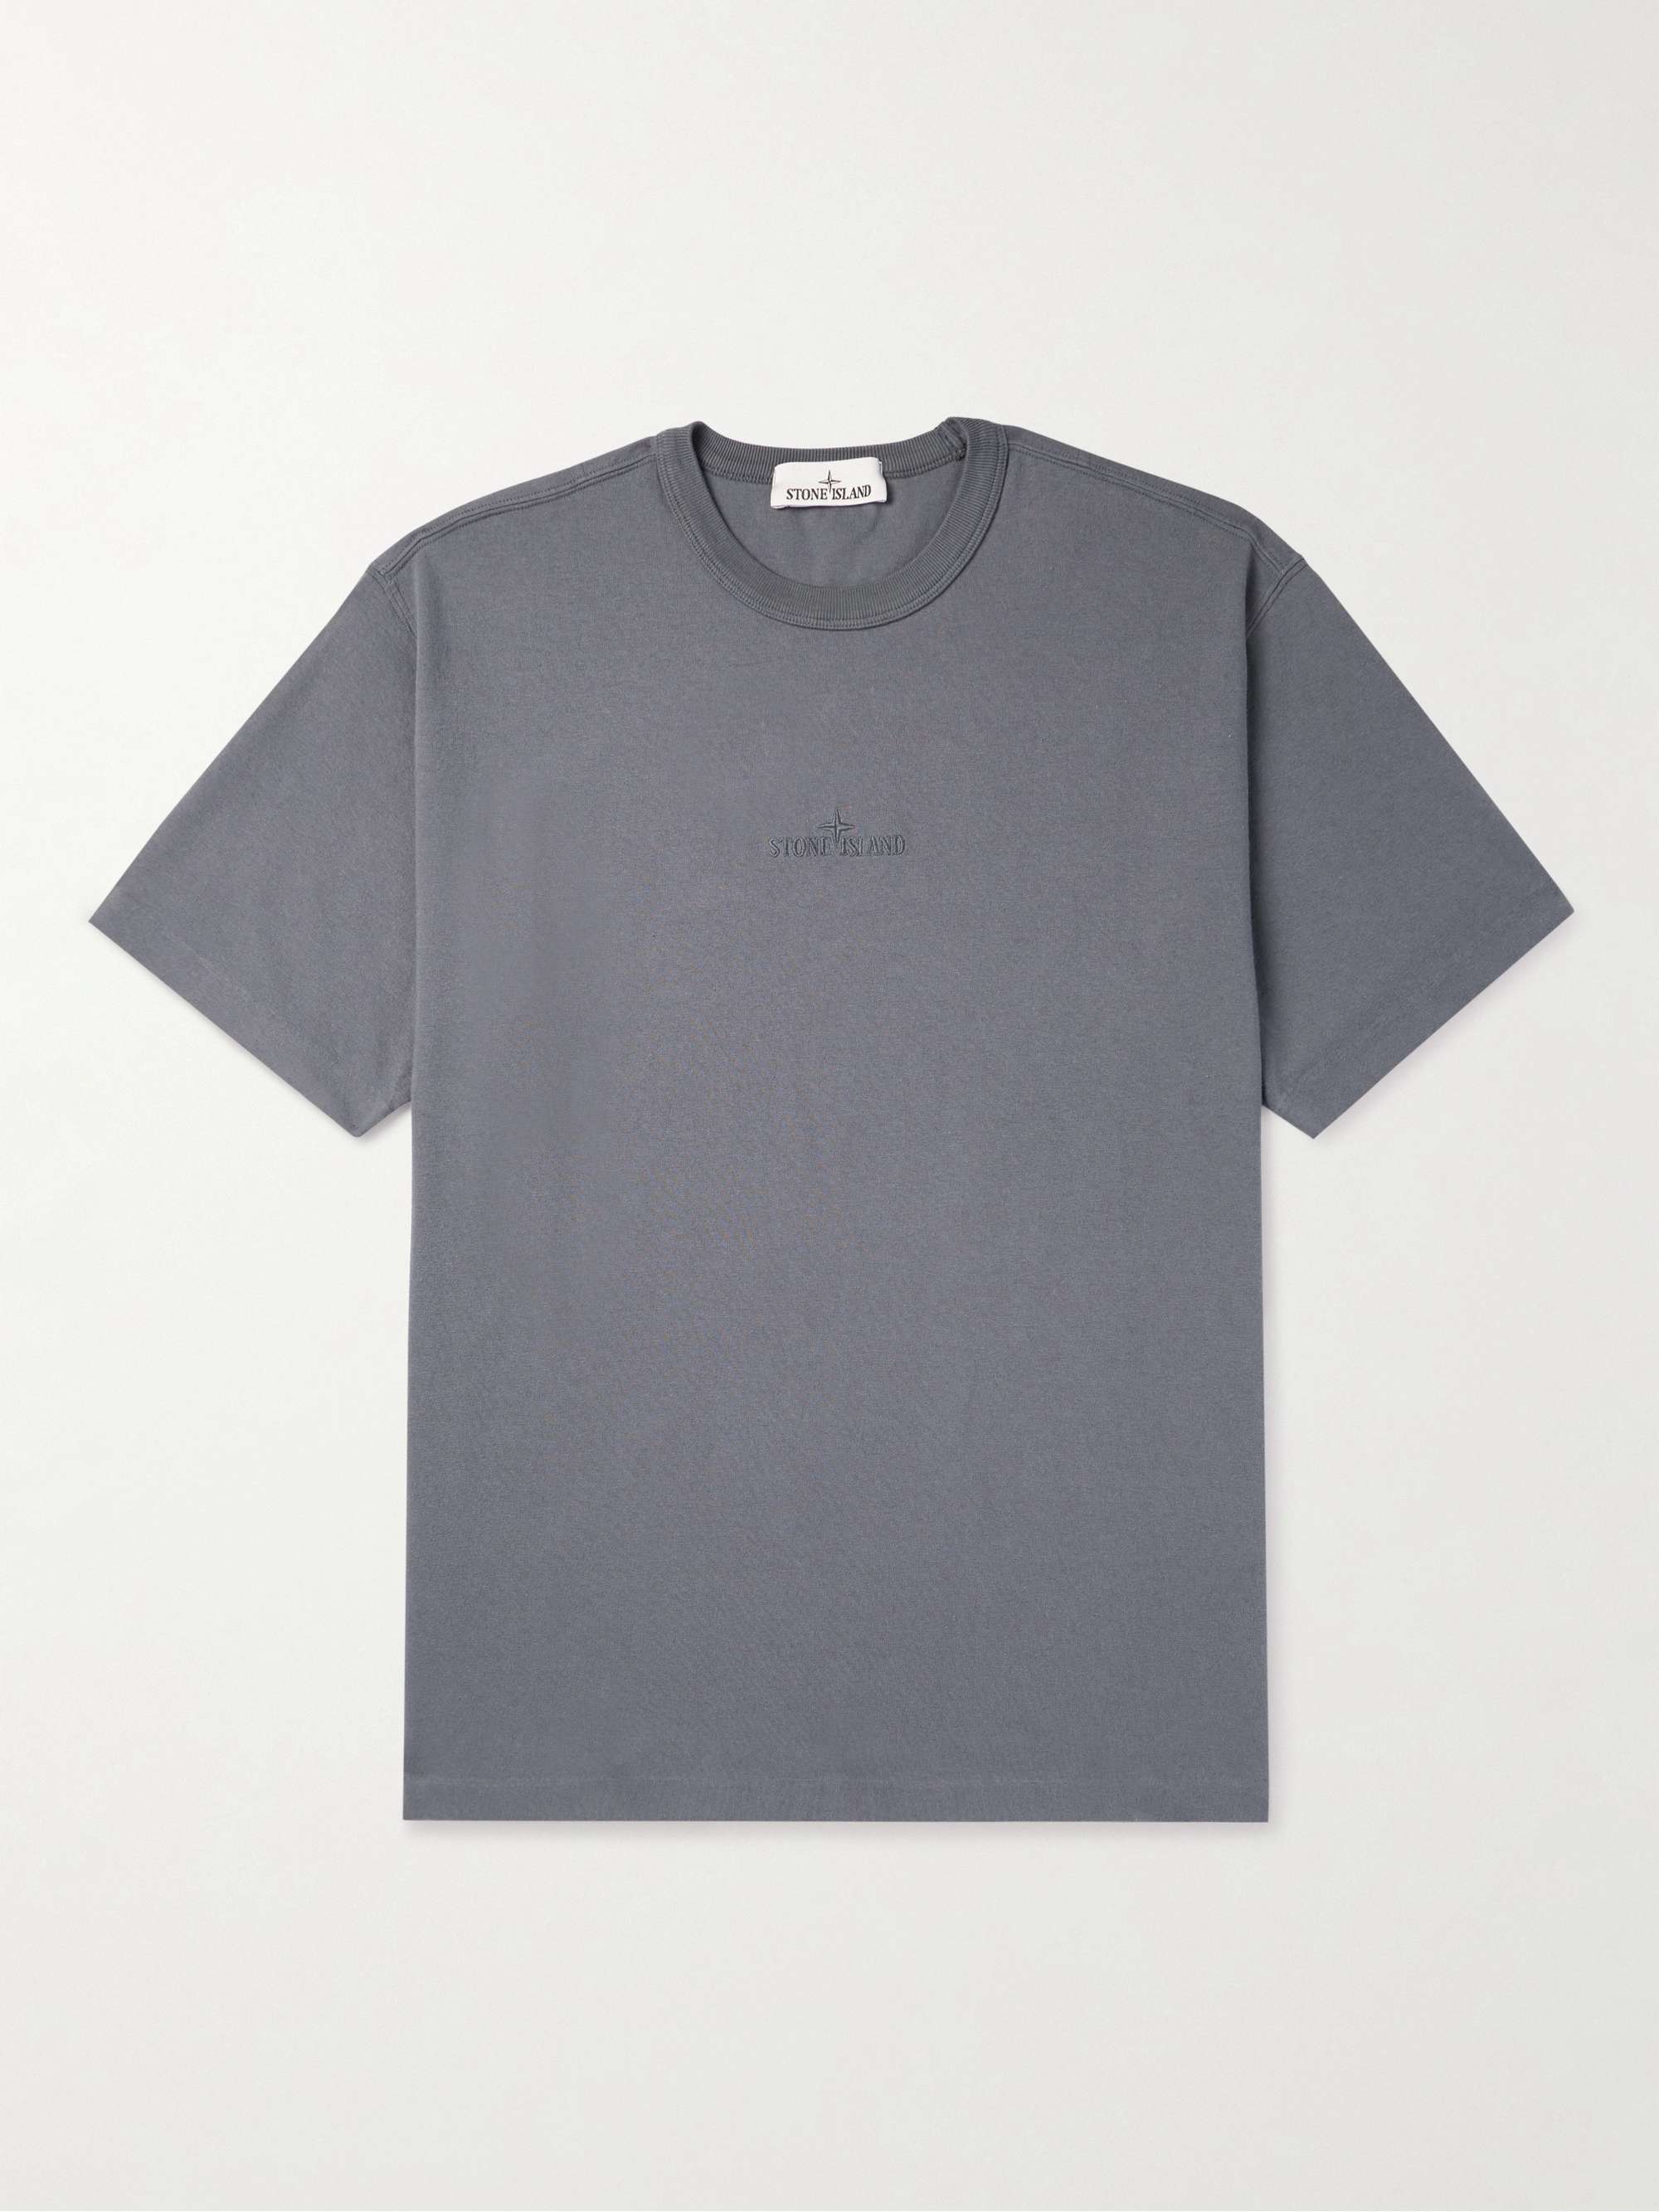 STONE ISLAND Logo-Embroidered Garment-Dyed Cotton-Jersey T-Shirt for Men |  MR PORTER